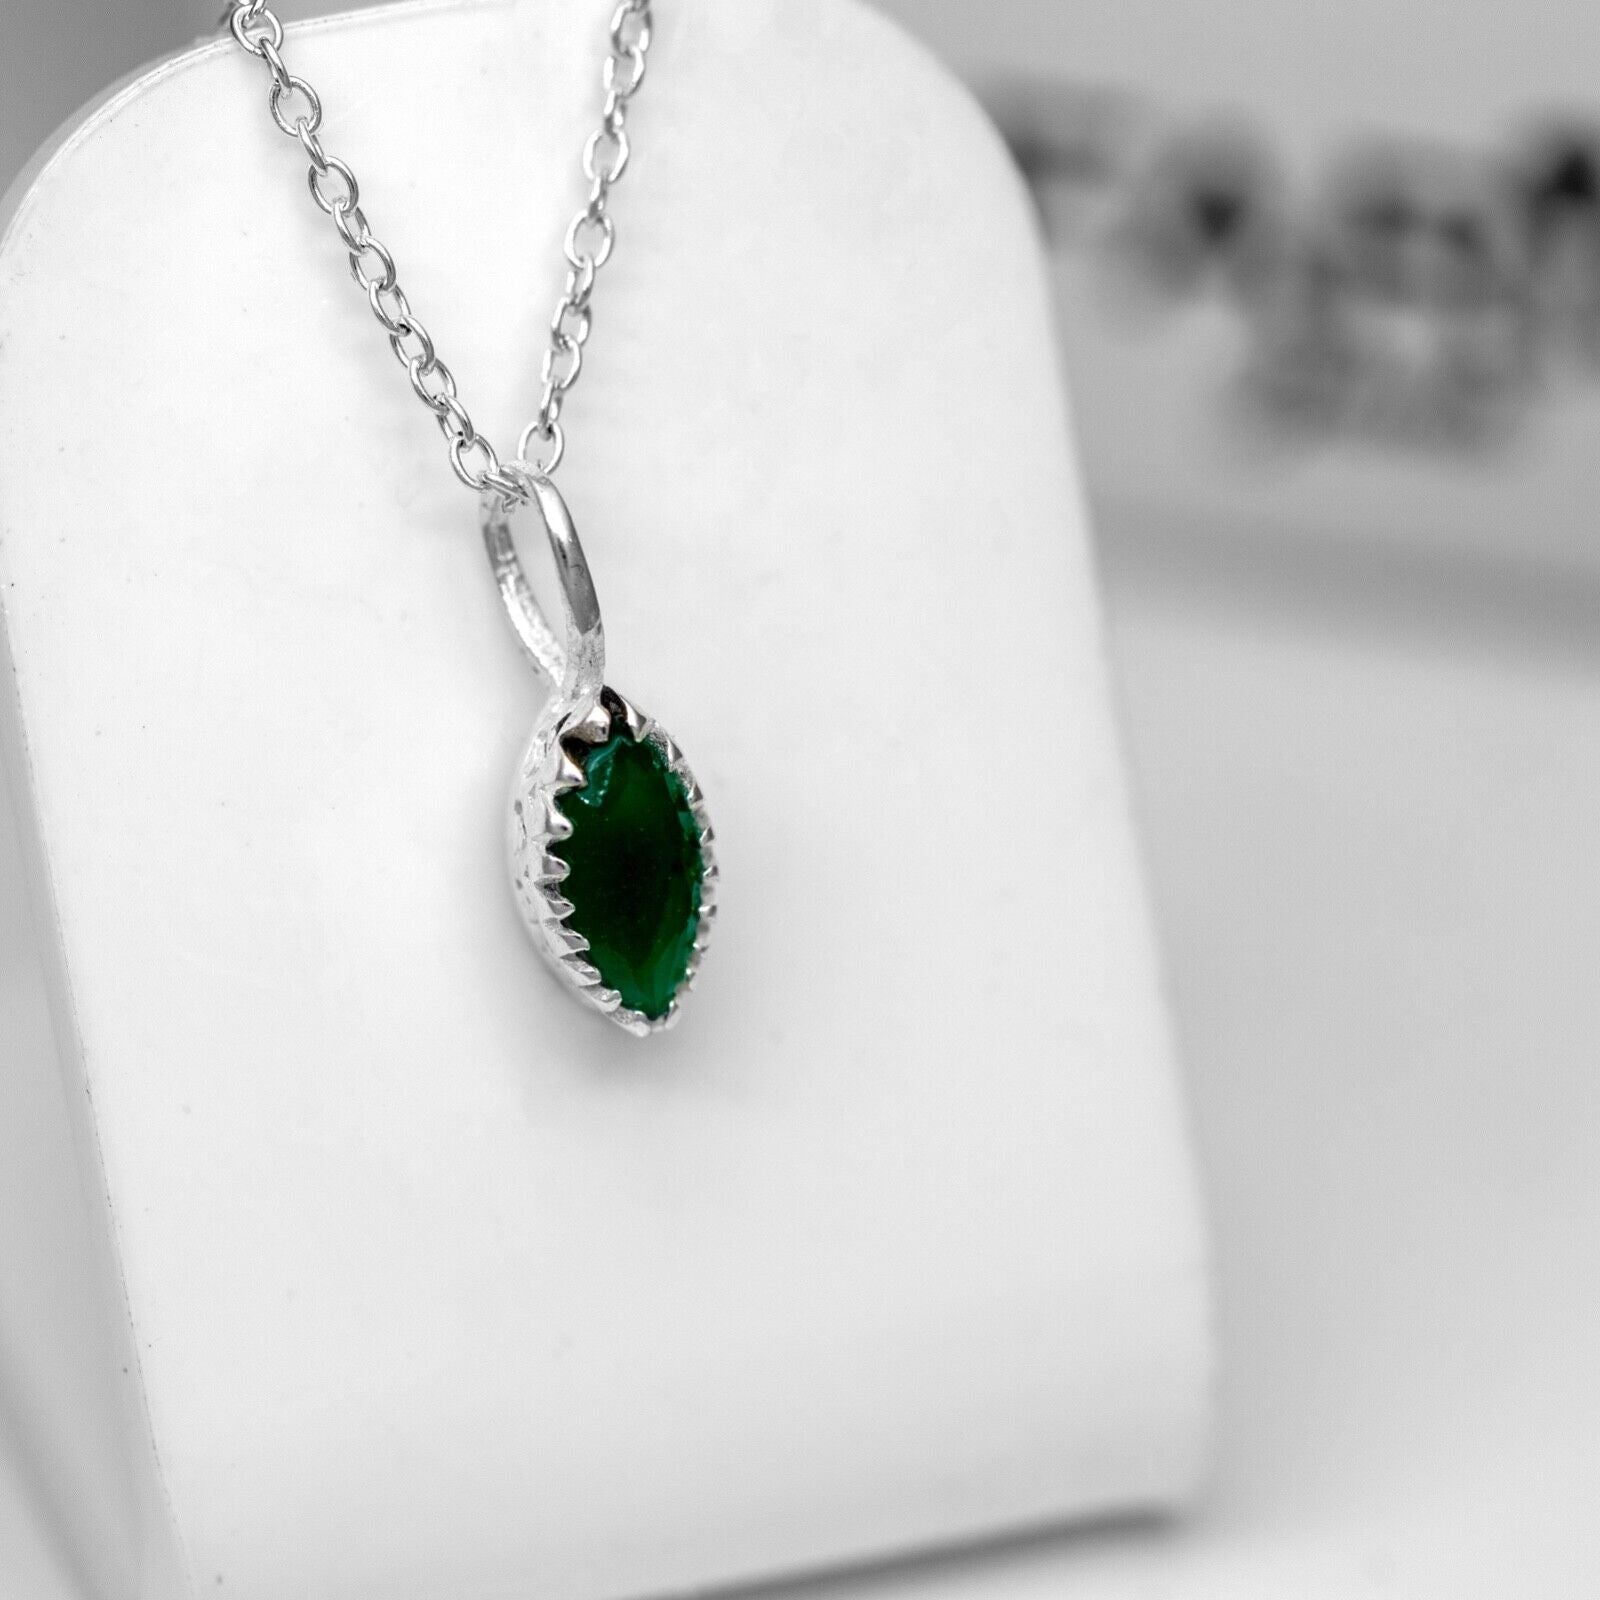 Marquise Green Onyx Sterling Silver 925 Pendant Necklace Ladies Jewellery